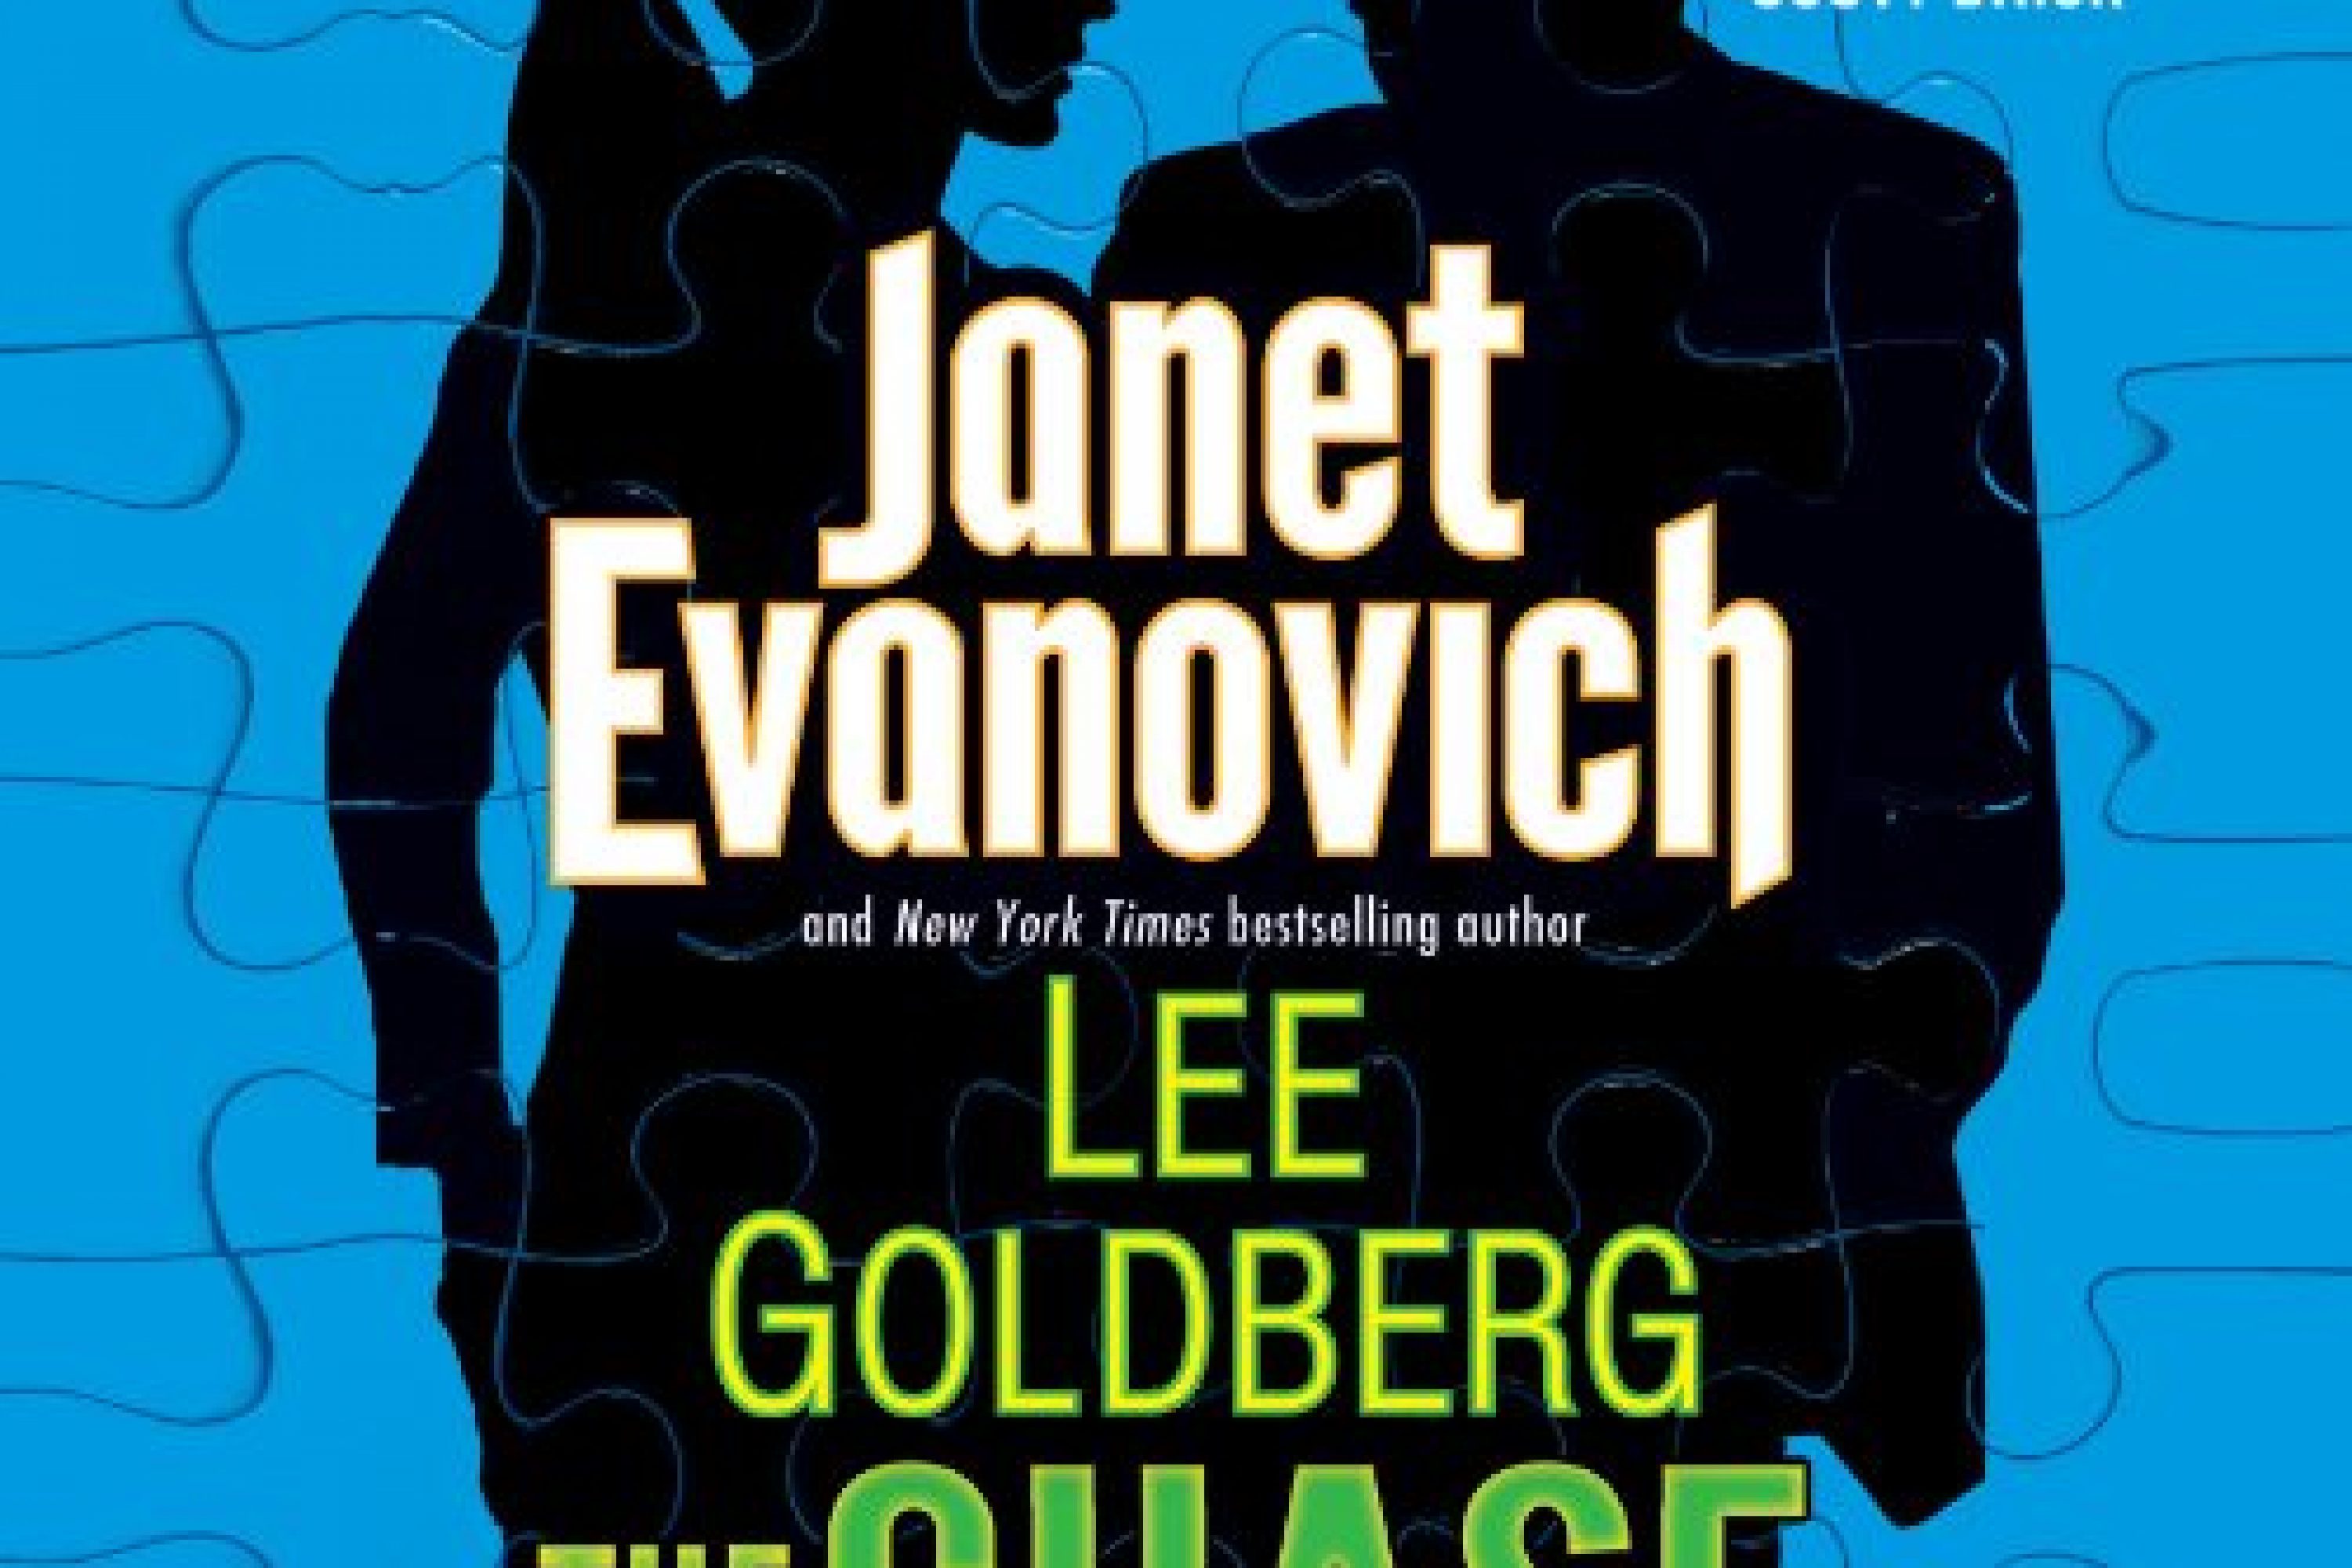 Audiobook Review: The Chase by Janet Evanovich and Lee Goldberg